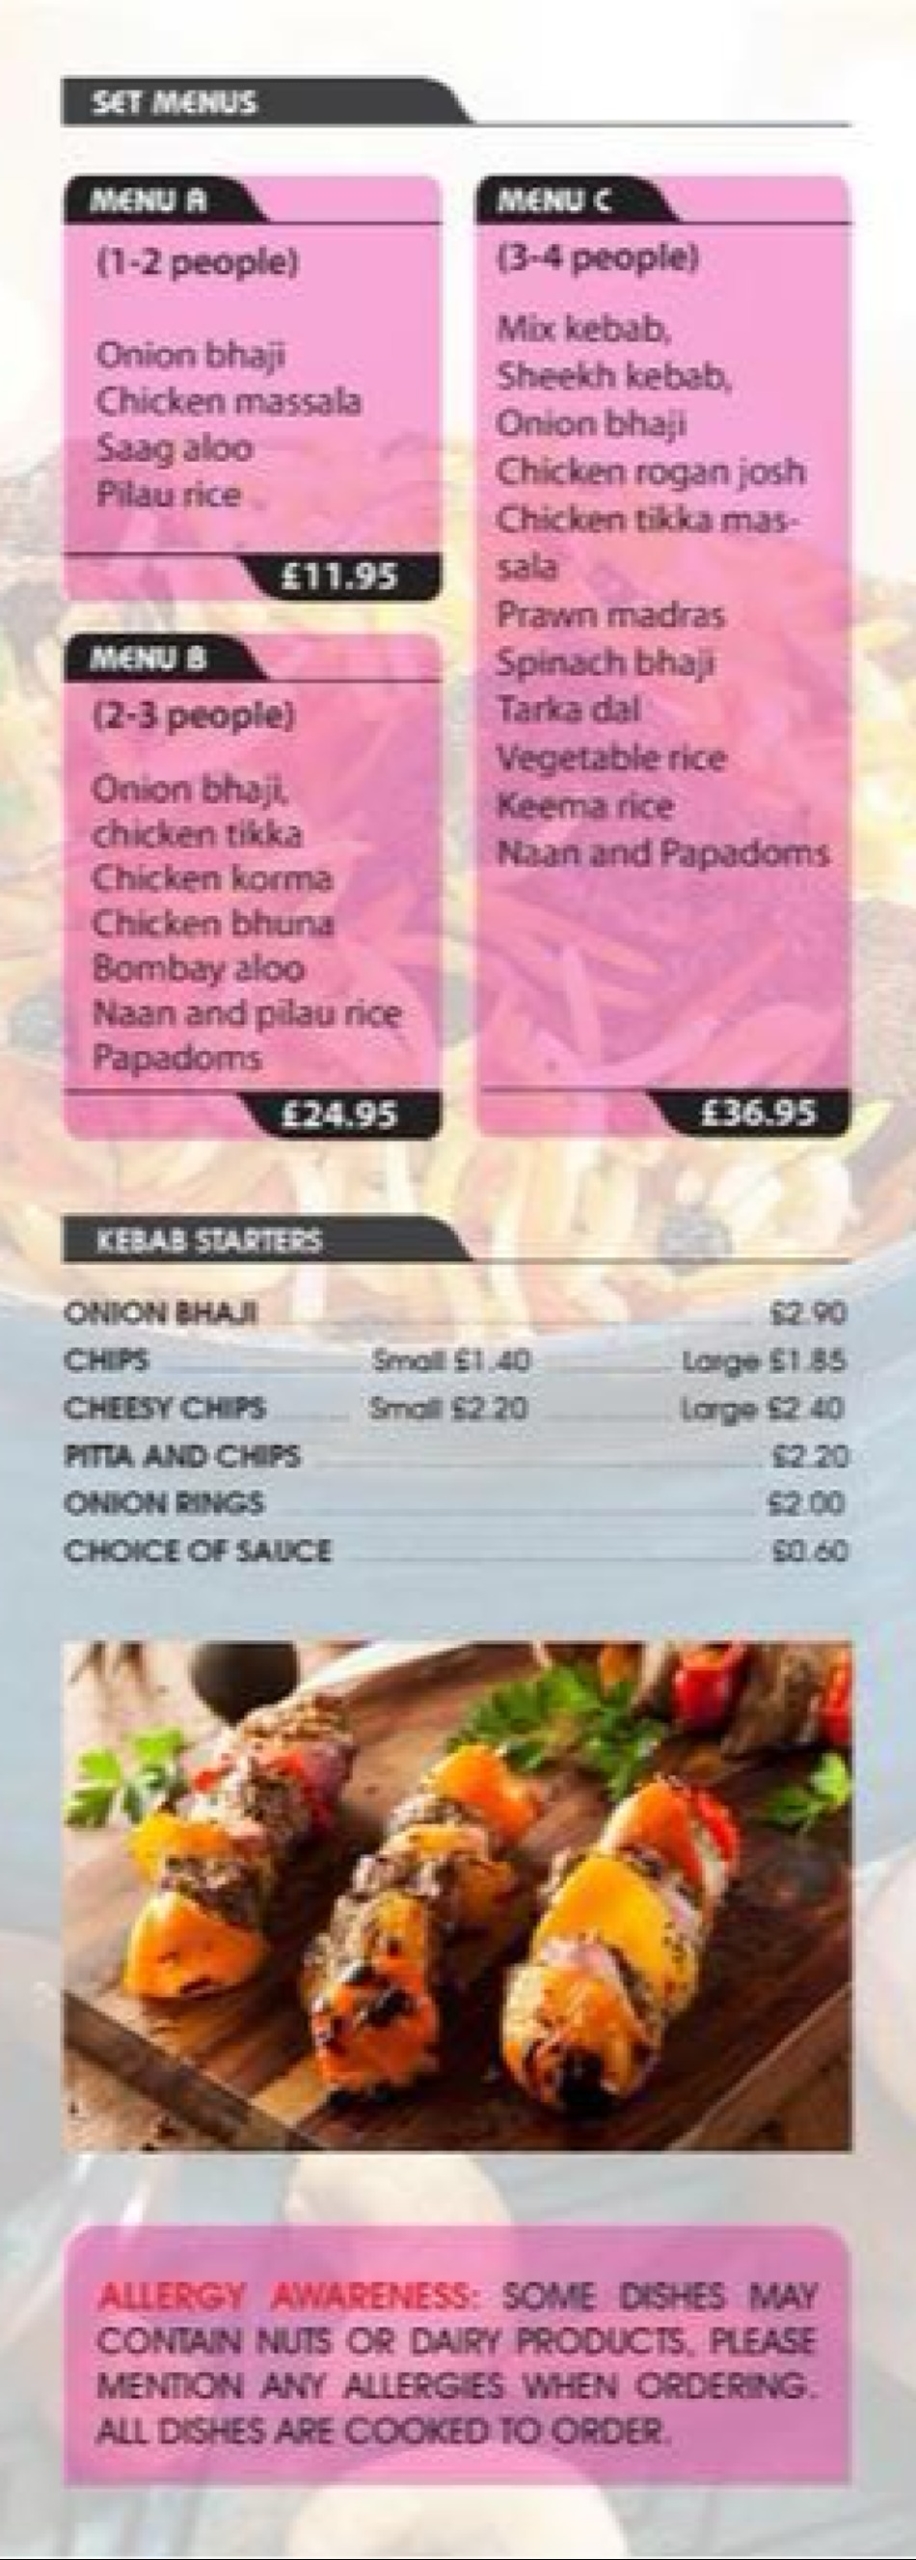 Takeaway Restaurant Menu Page - The New Bengal Indian Takeaway - Andover